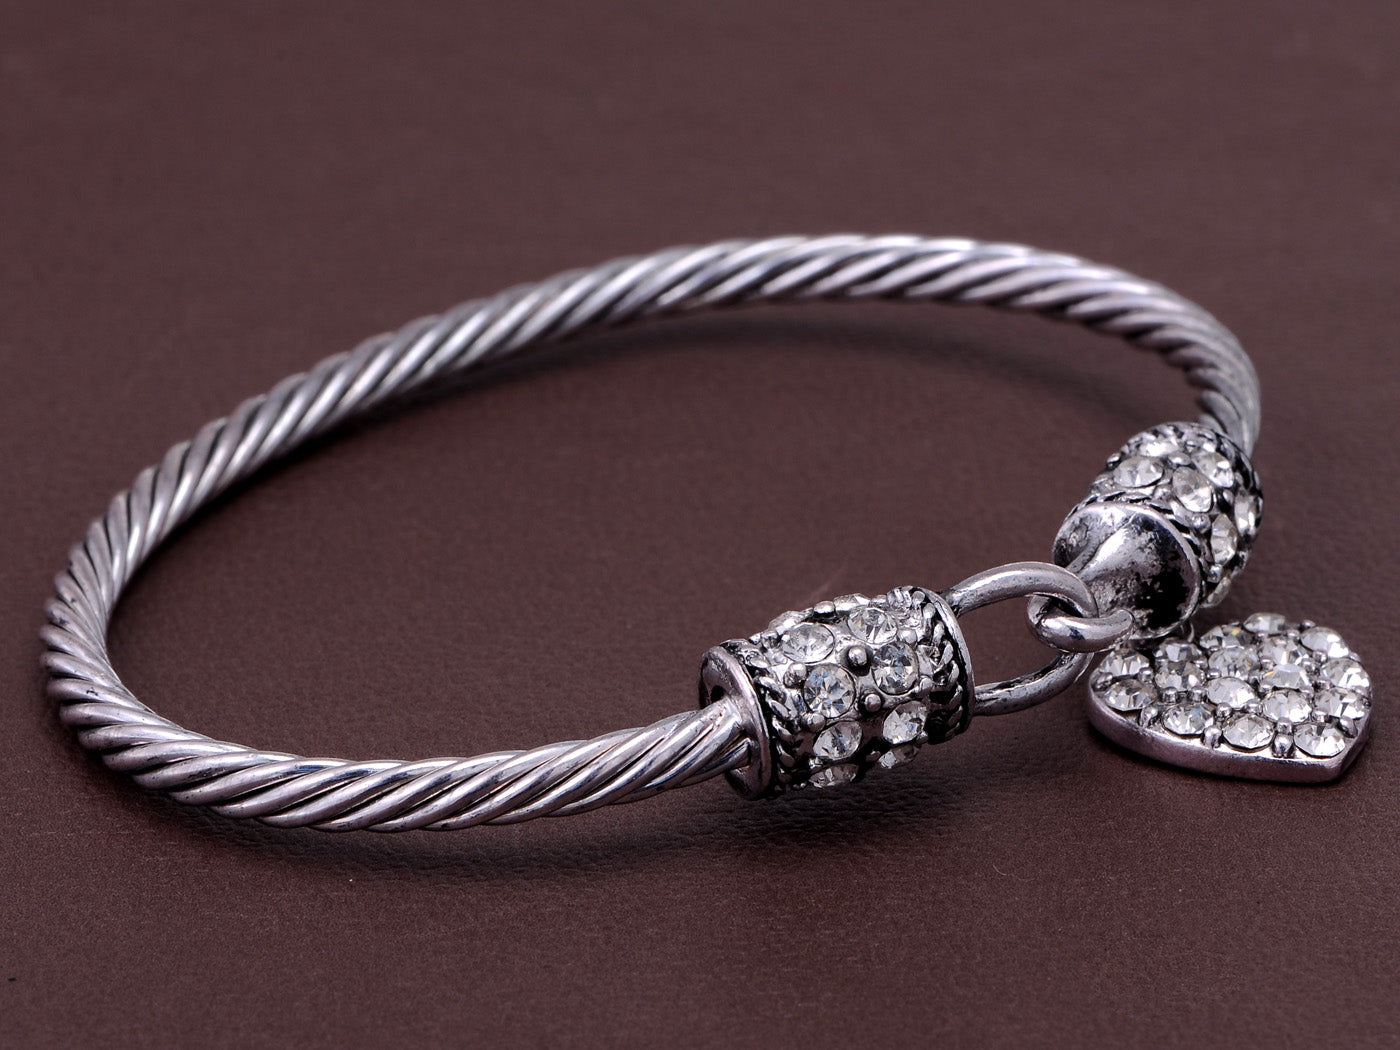 Silver D Accented Cord Bracelet With Diamond Heart Charm